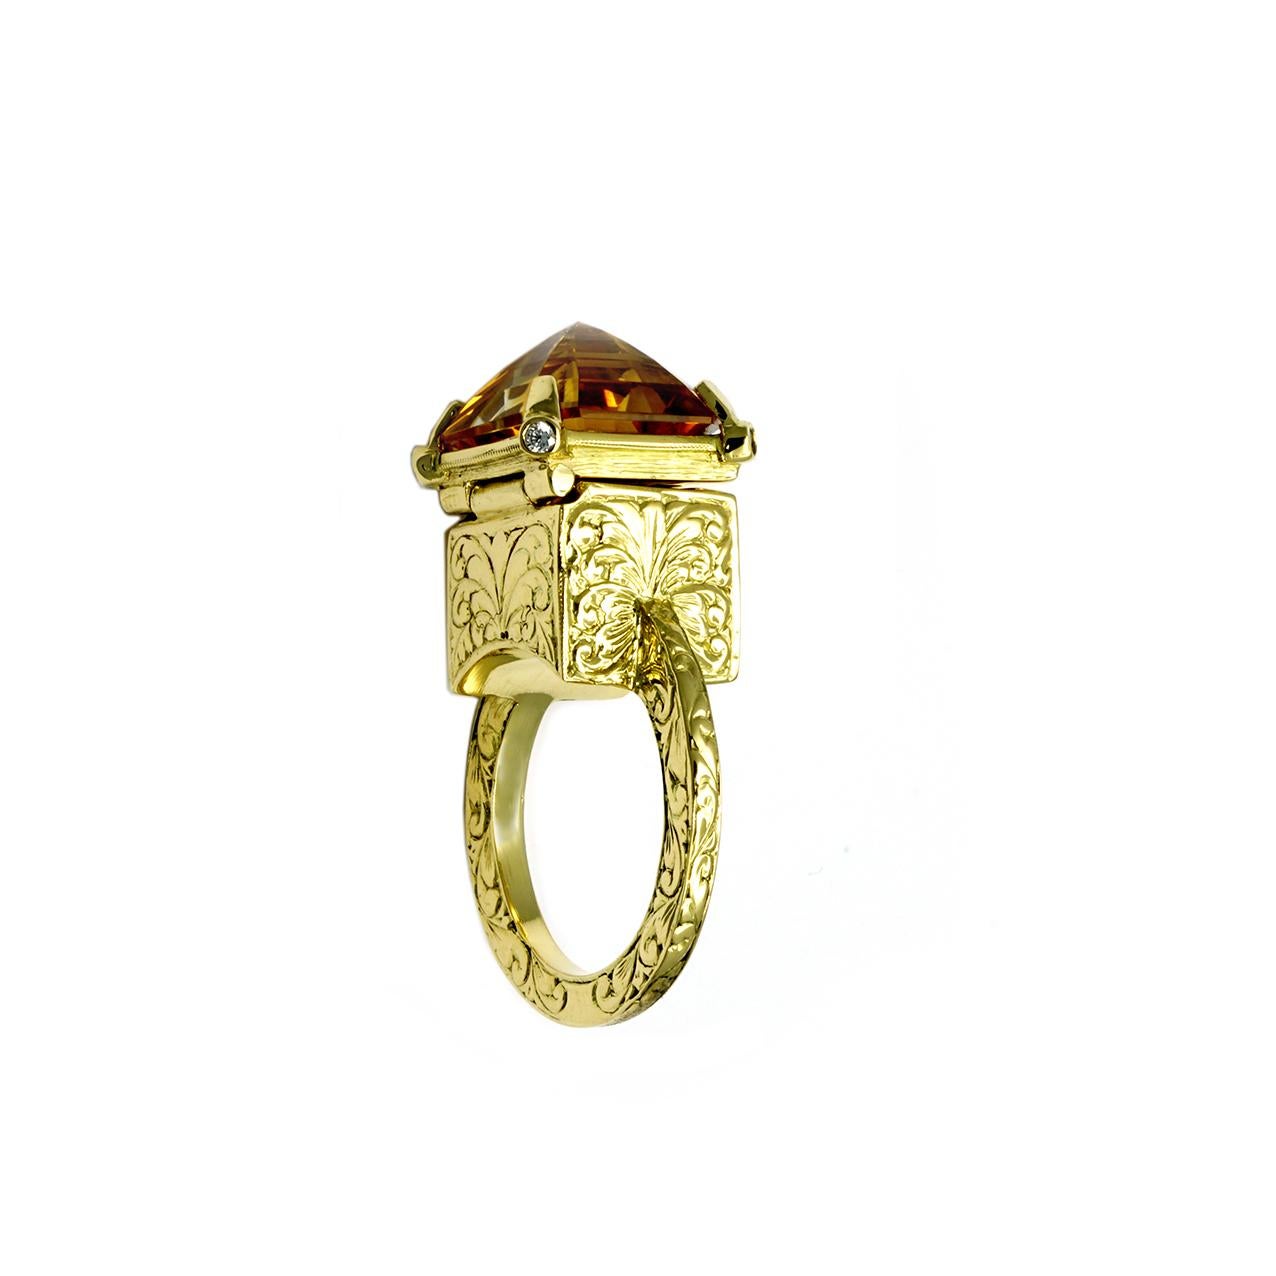 Princess Cut 18ct Gold, Citrine and Diamond, Baroque Engraved Victorian Poison Ring with Key